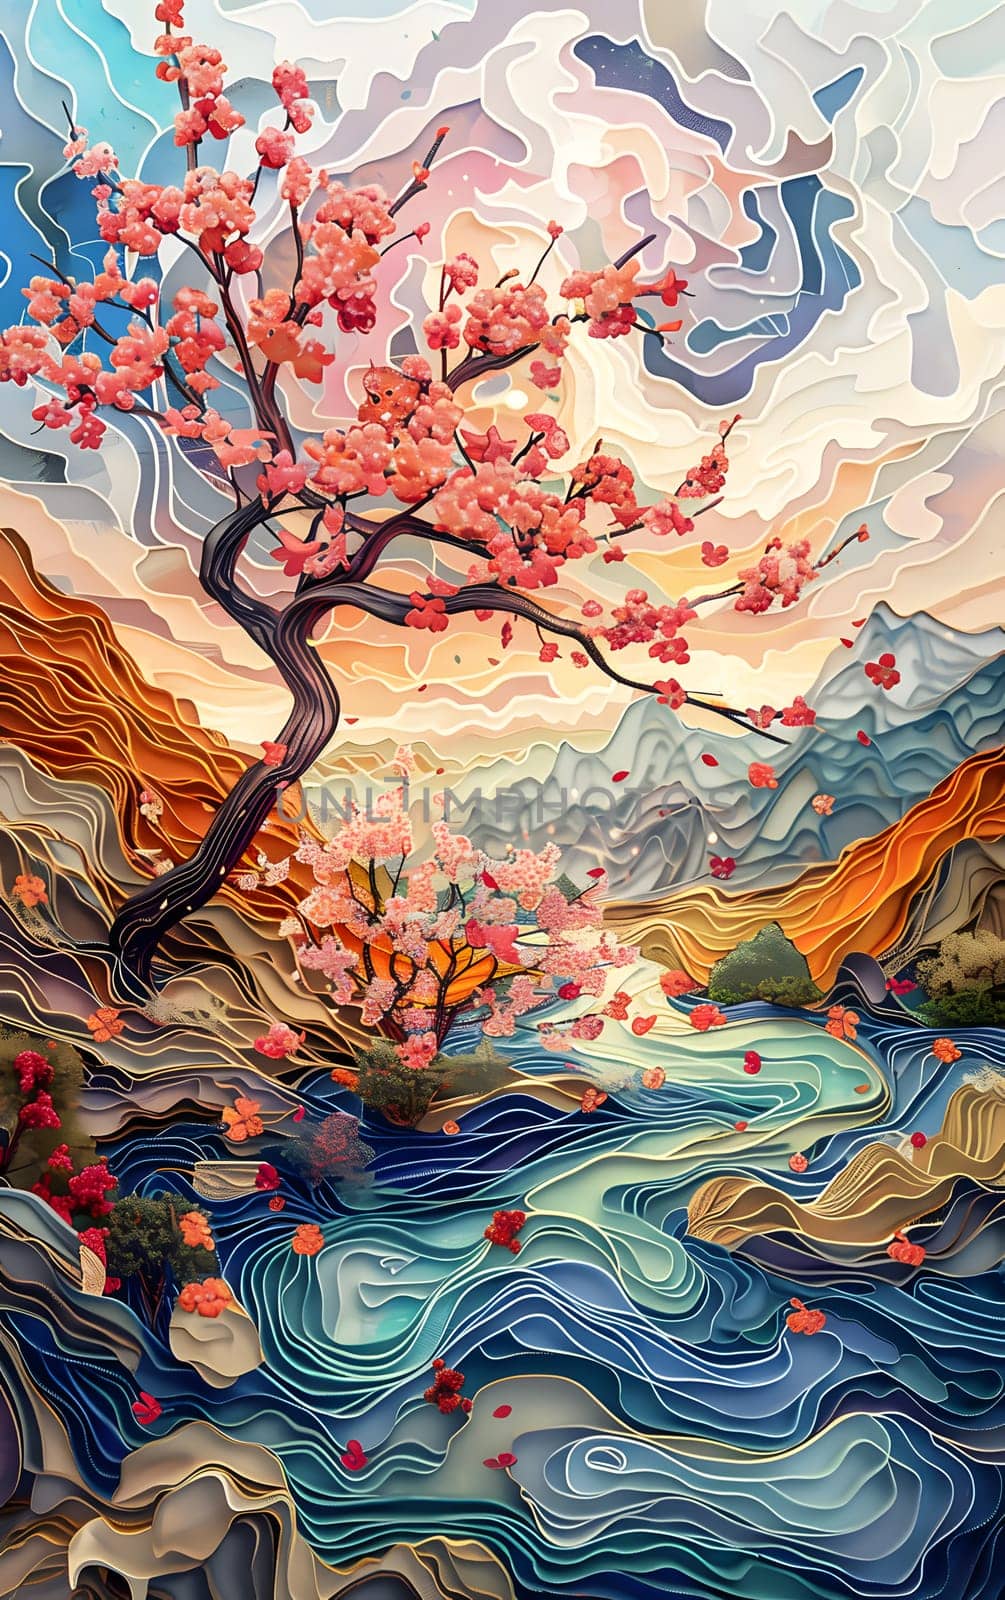 A stunning painting capturing a river with a cherry blossom tree in the forefront, showcasing the beauty of nature through art and watercolor paint